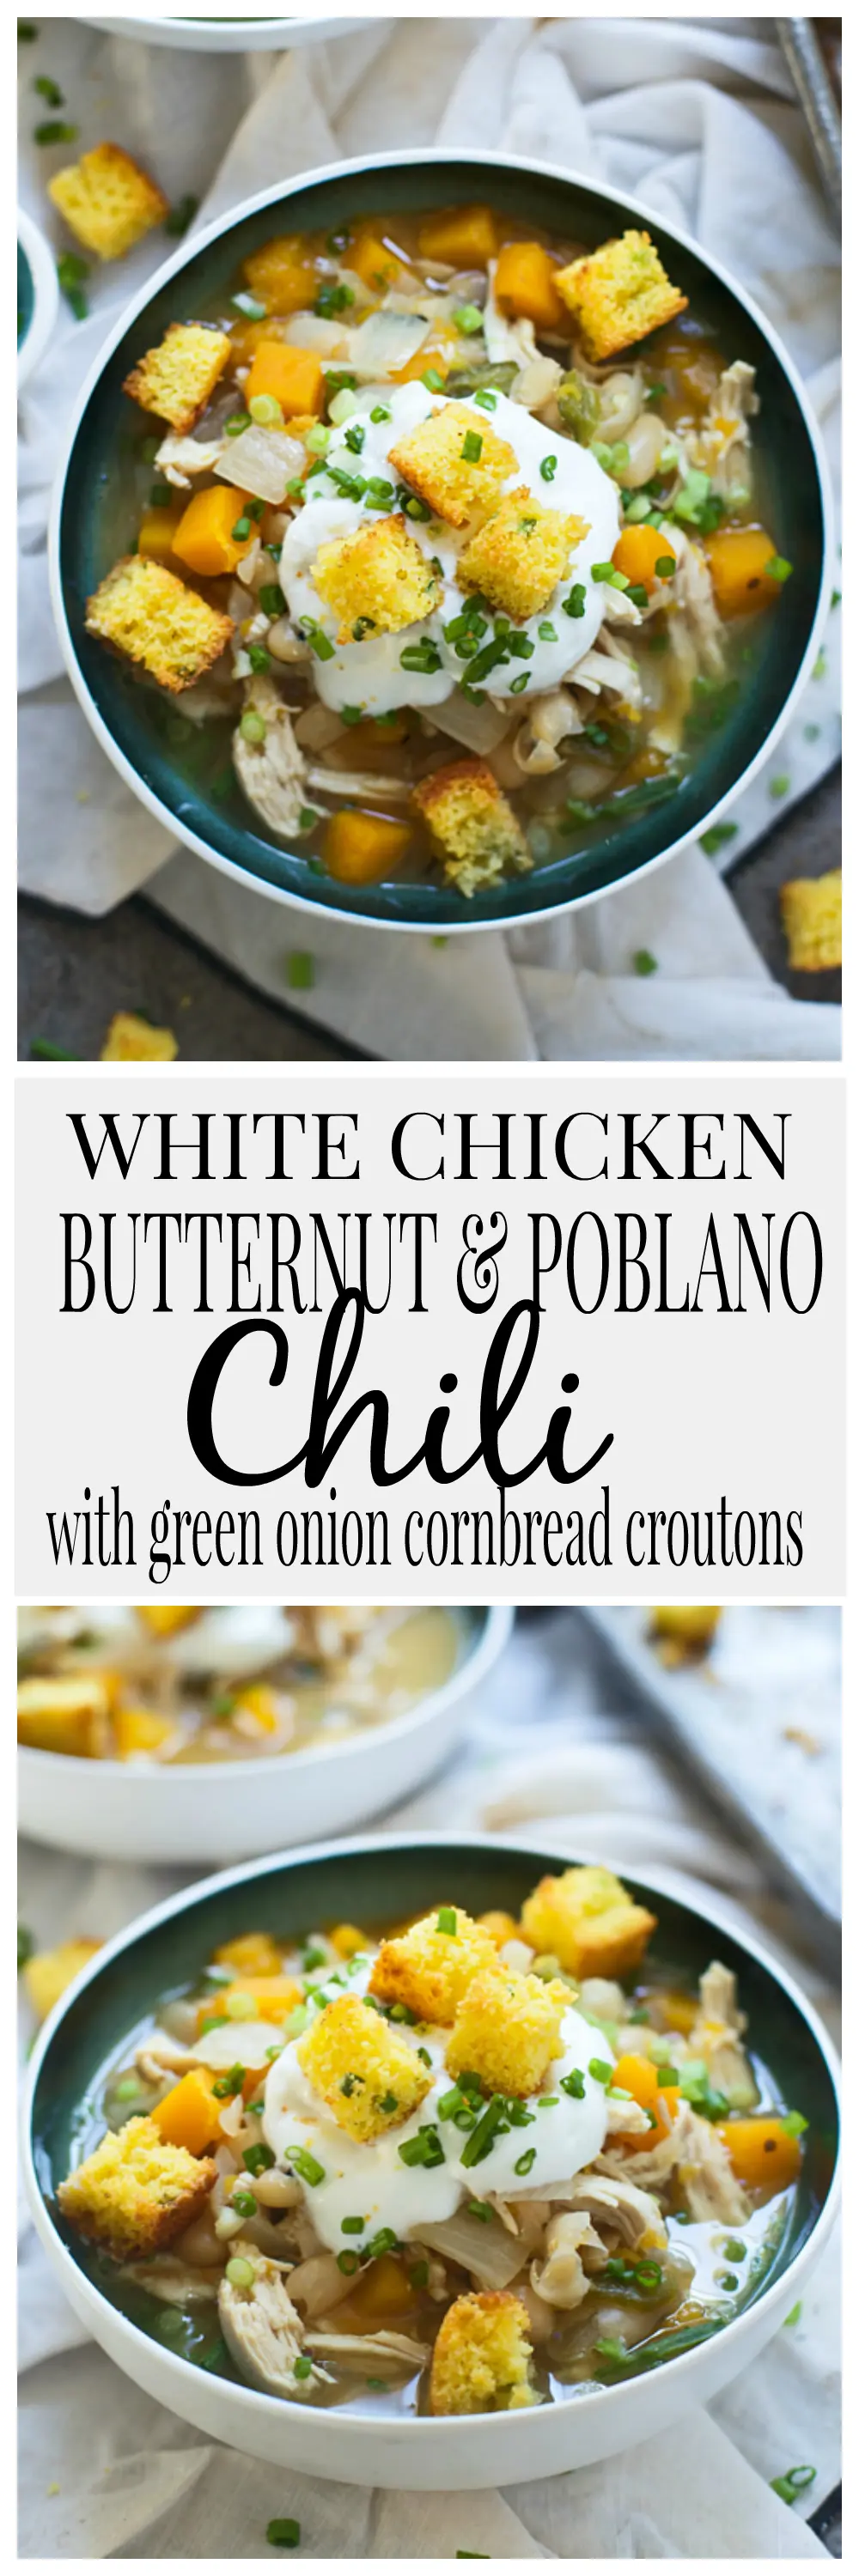 White Chicken Butternut and Poblano Chili with Cornbread Croutons